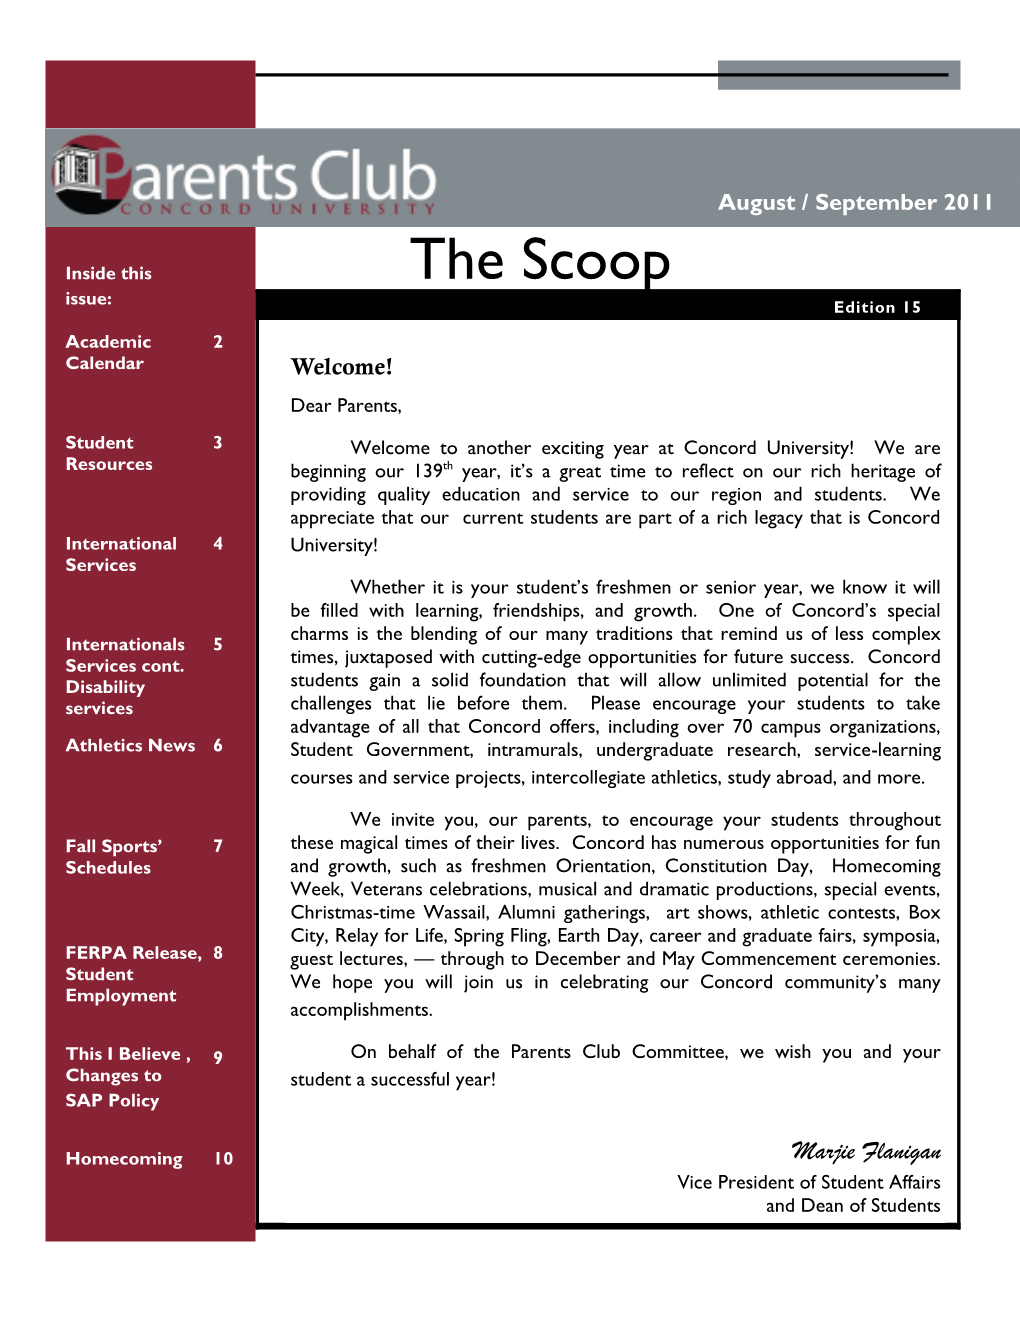 The Scoop Issue: Edition 15 Academic 2 Calendar Welcome! Dear Parents